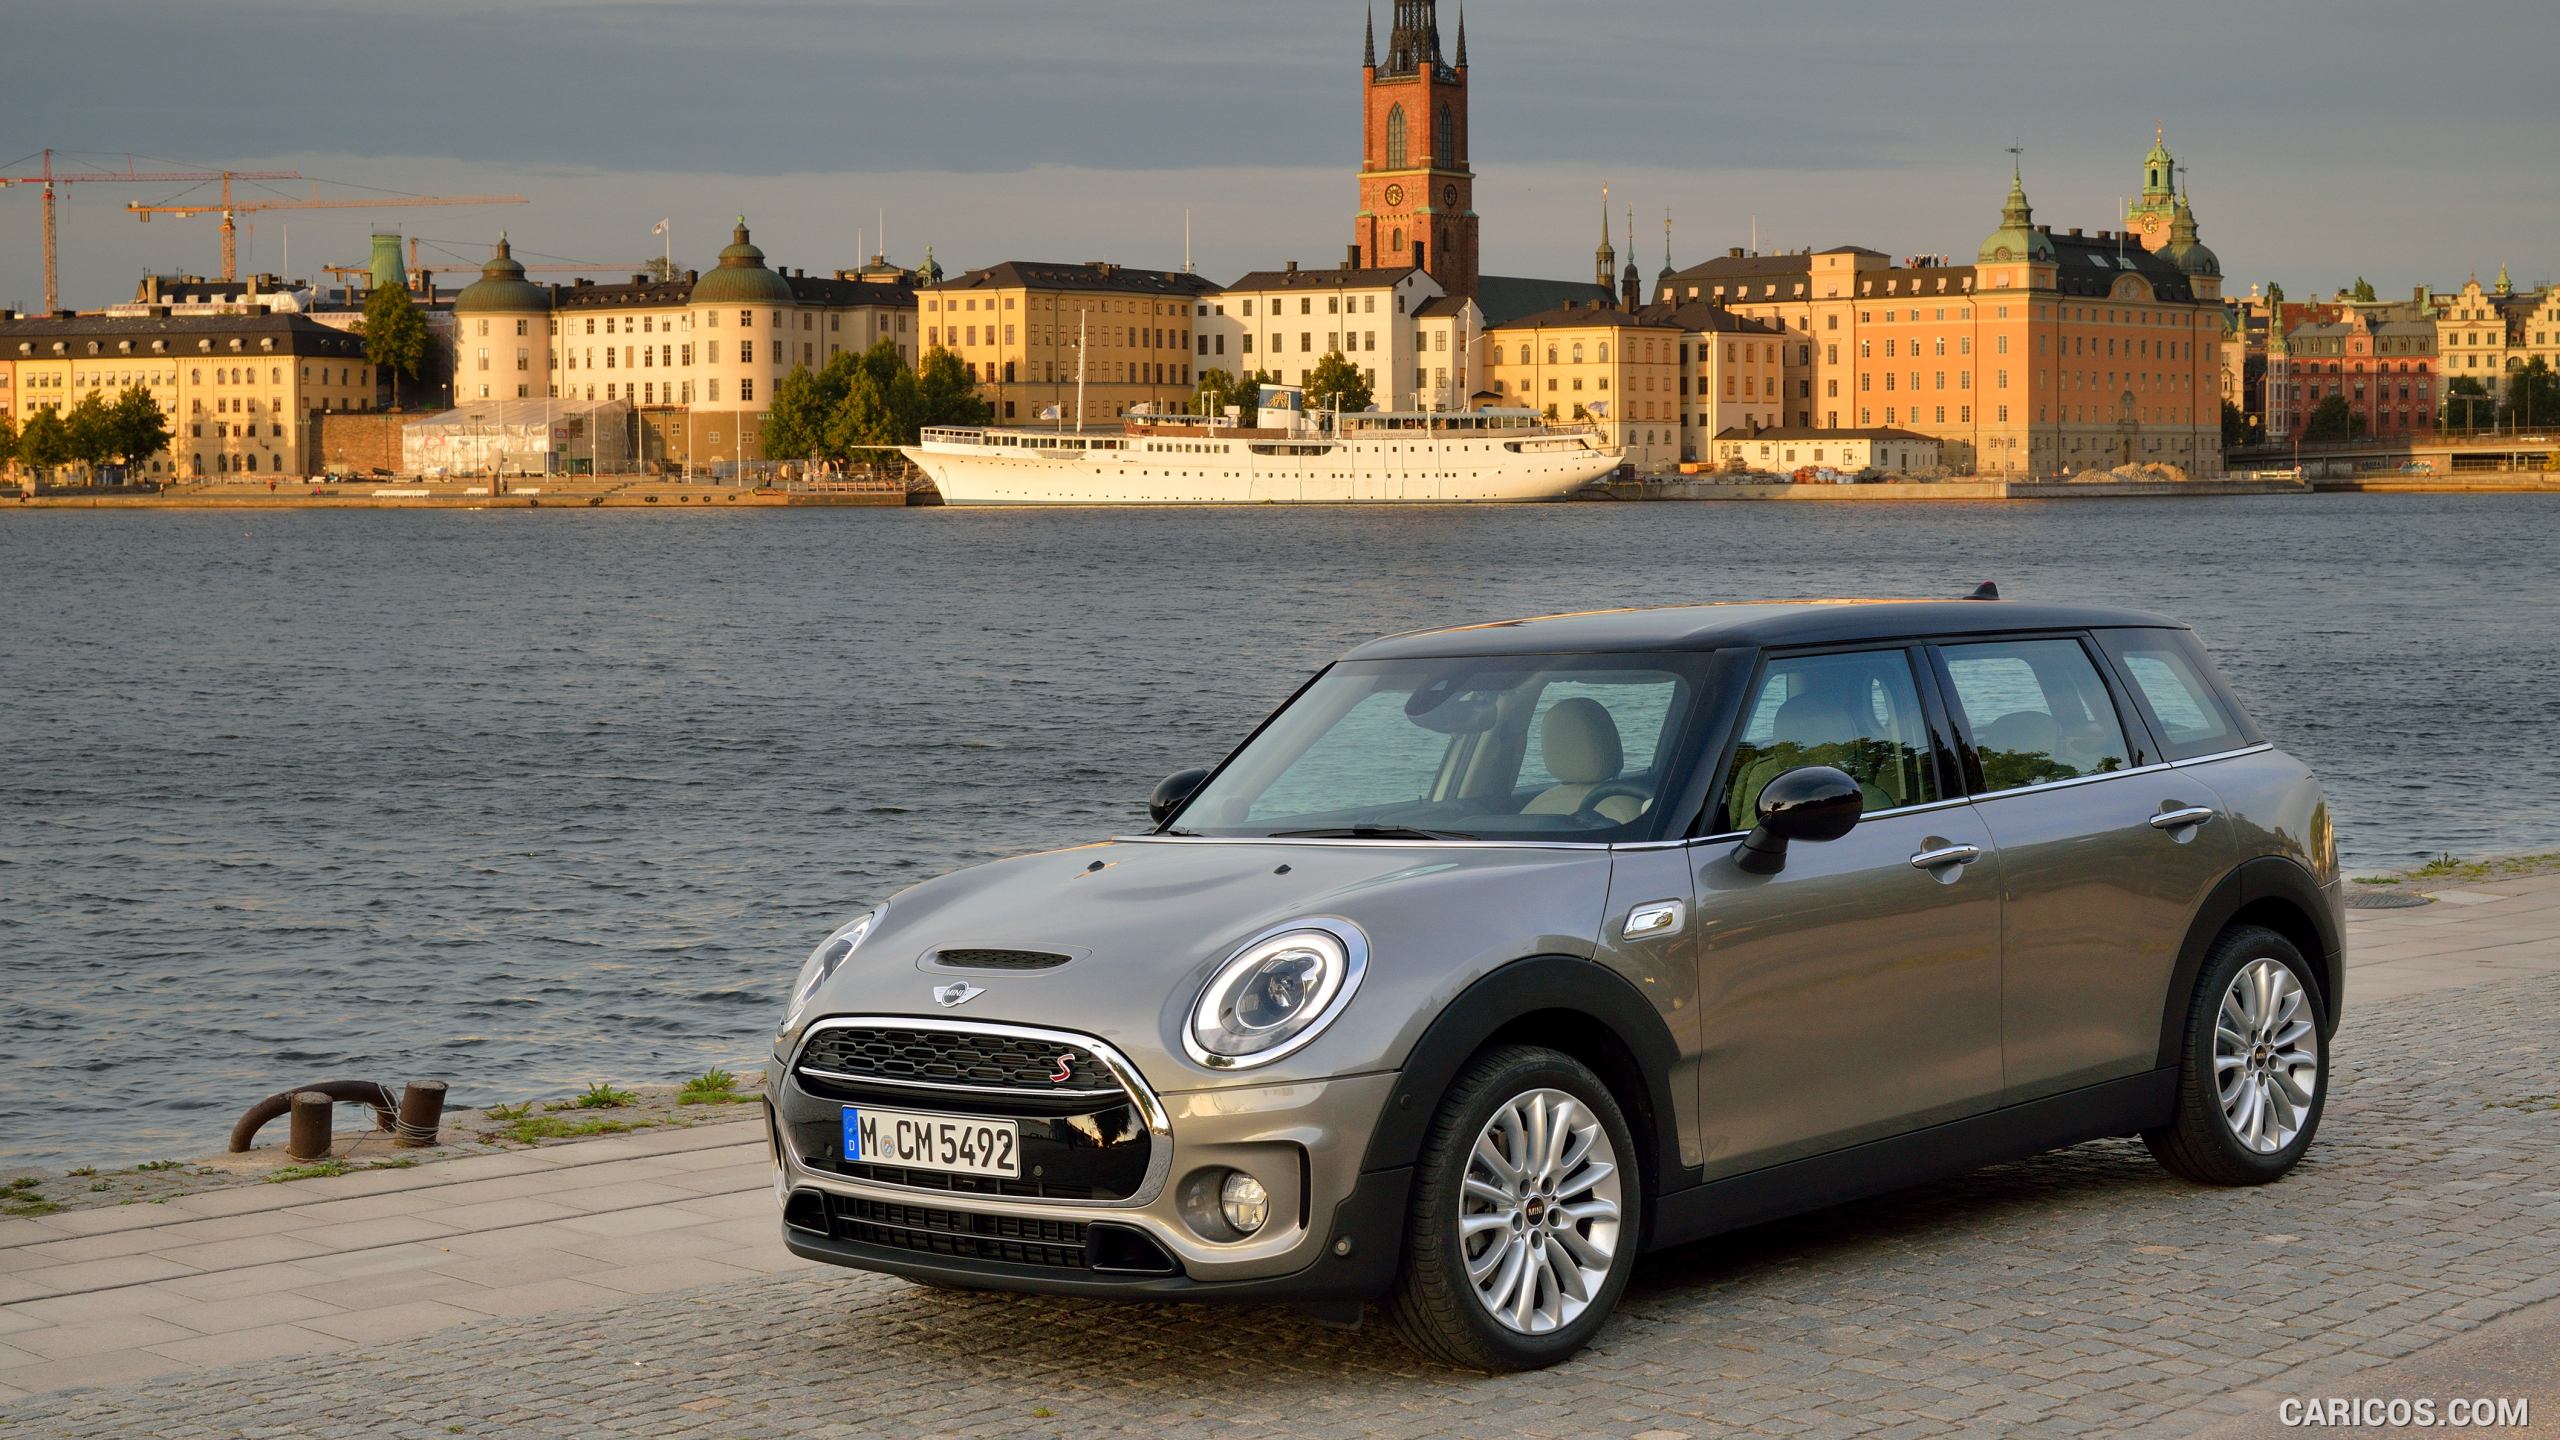 2016 MINI Cooper S Clubman in Metallic Melting Silver - Front, #162 of 380